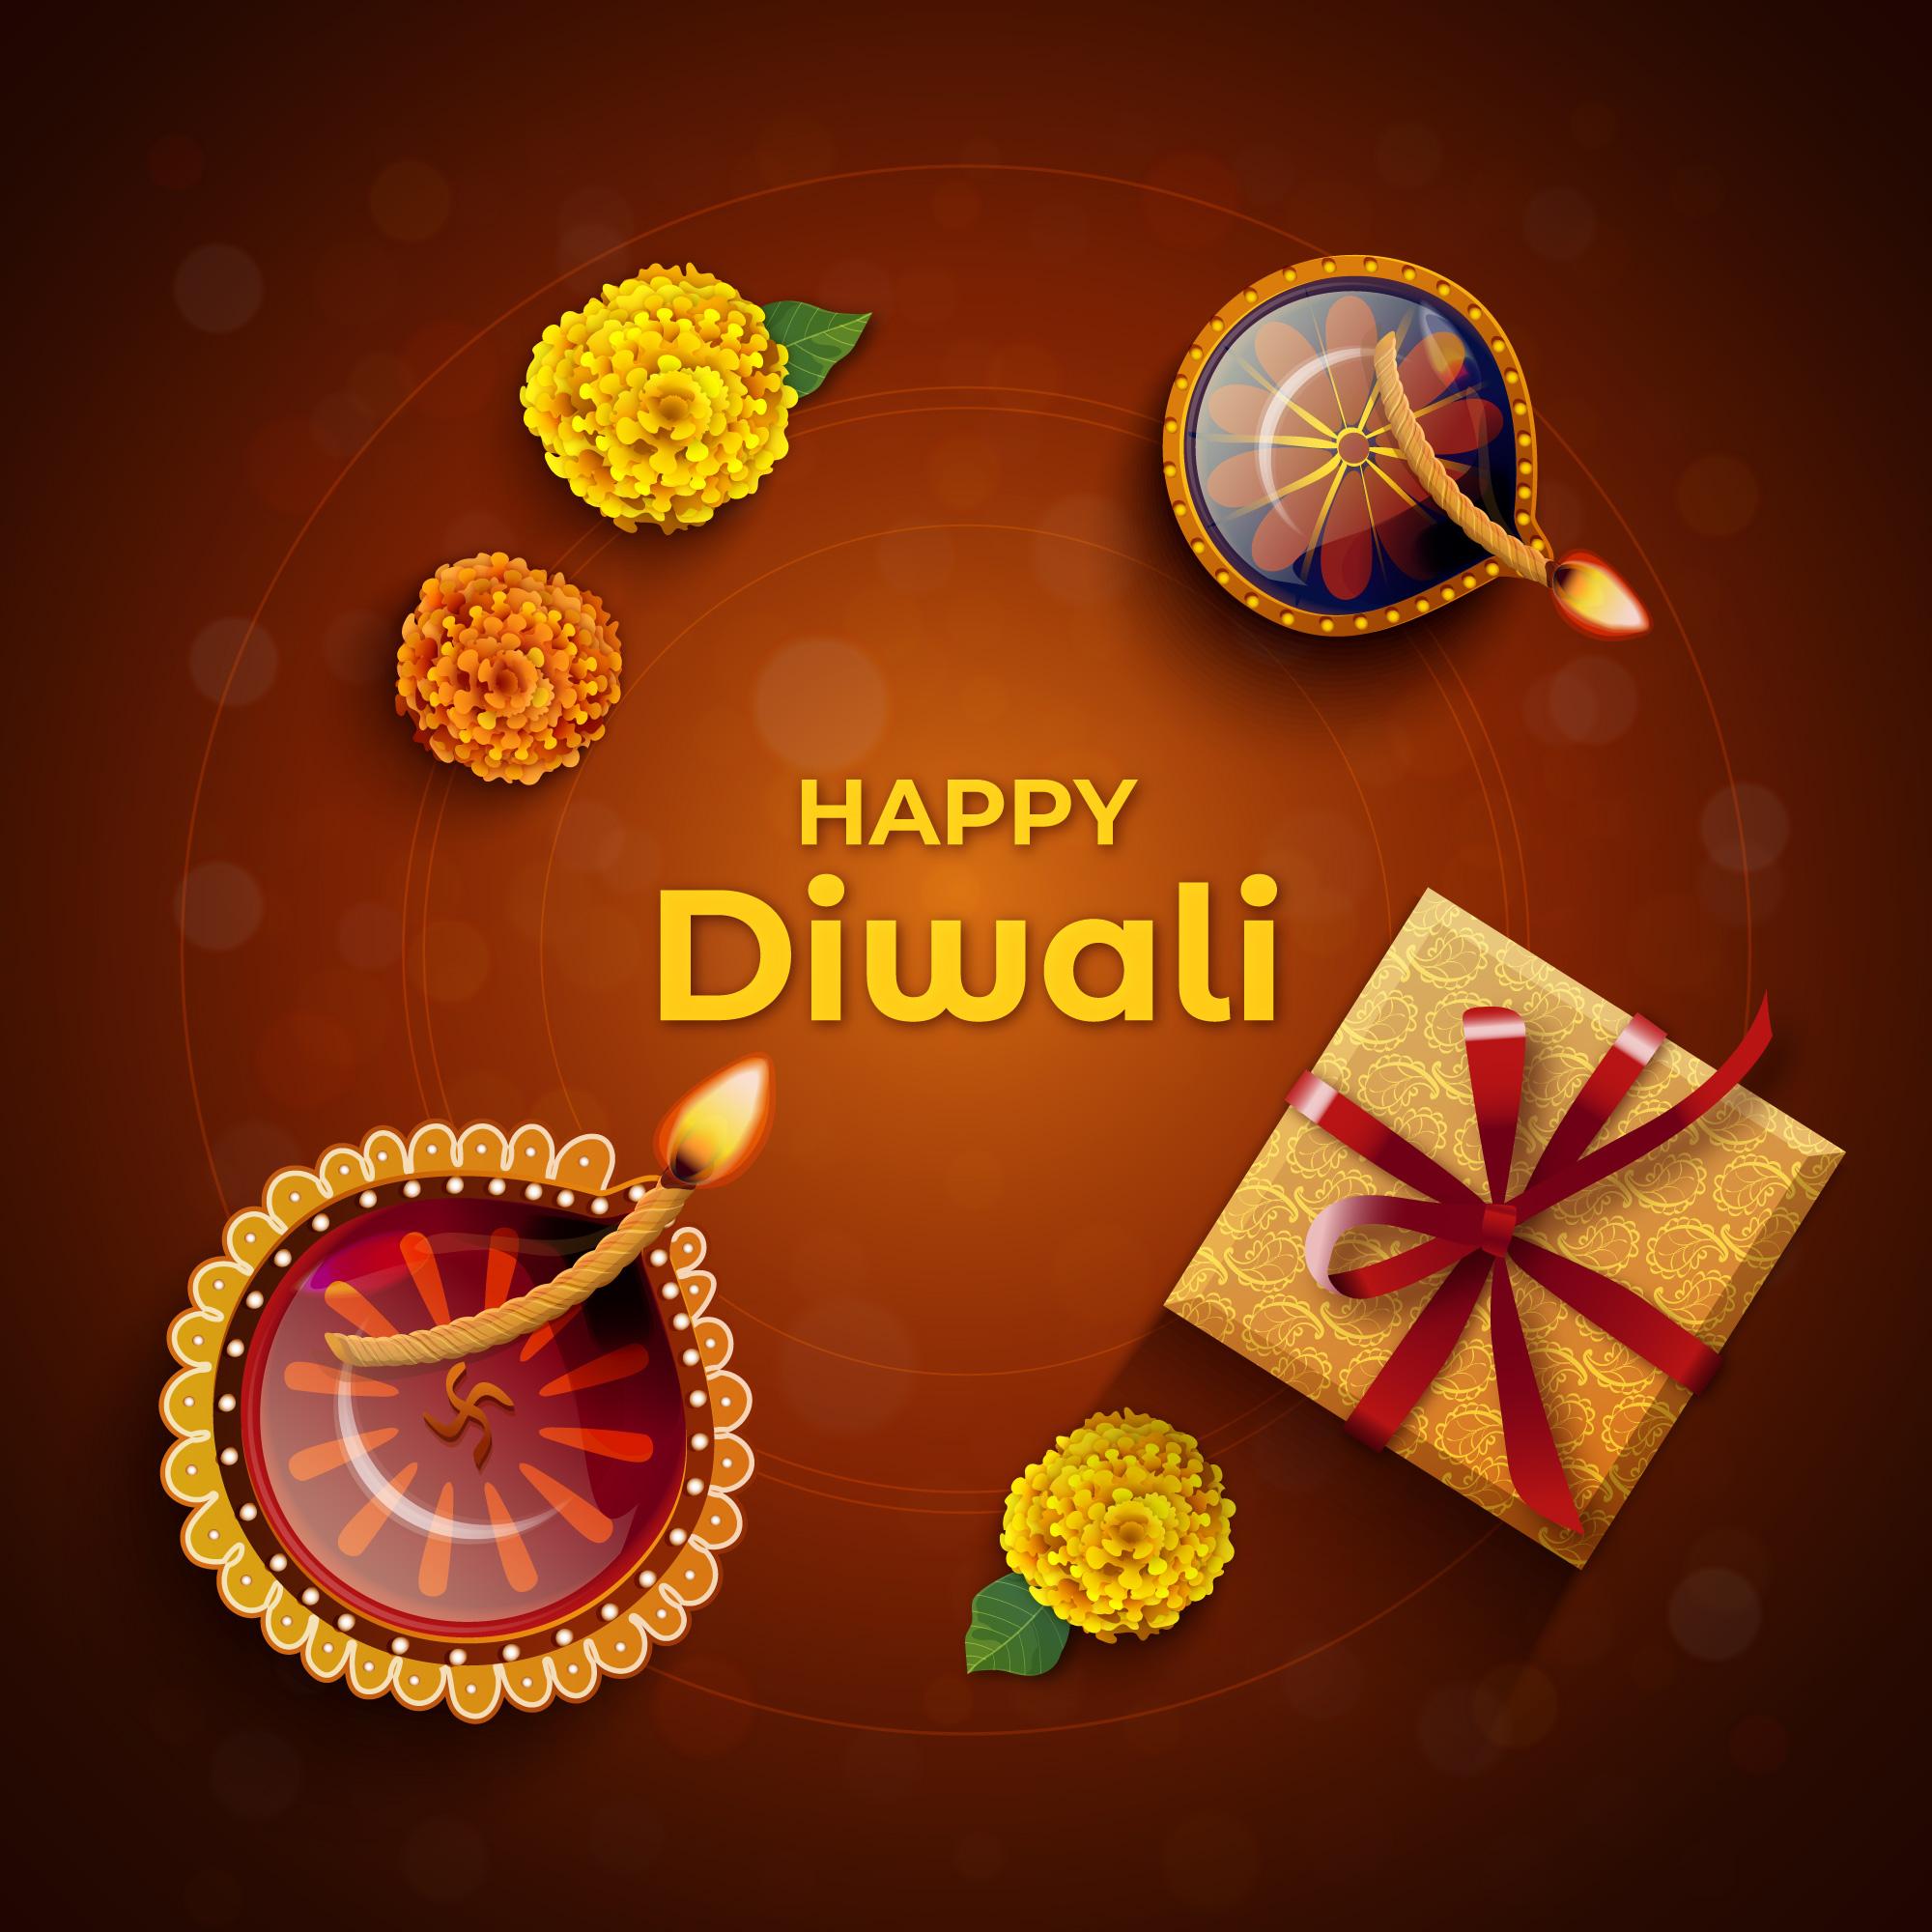 Best ways to convey greetings to your relatives on Diwali